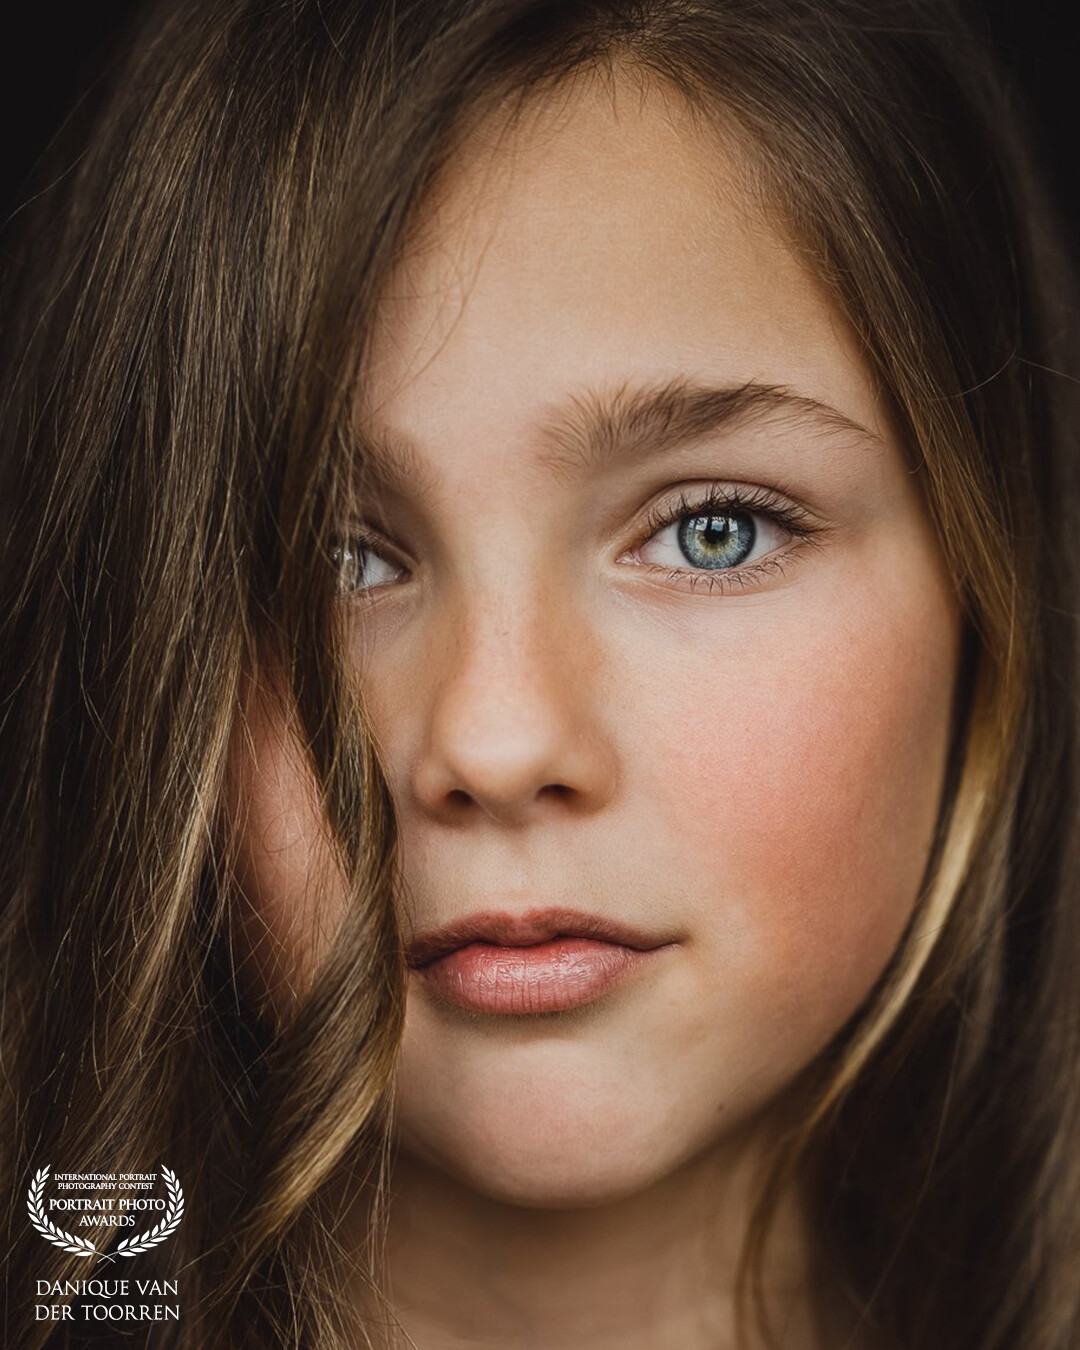 My own model Ravenna, my beautiful 9 year old daughter.<br />
Her face and her eyes show how beautiful she is<br />
<br />
Model: Ravenna<br />
Photo & Lightroom edit: @daniquevdtphotography